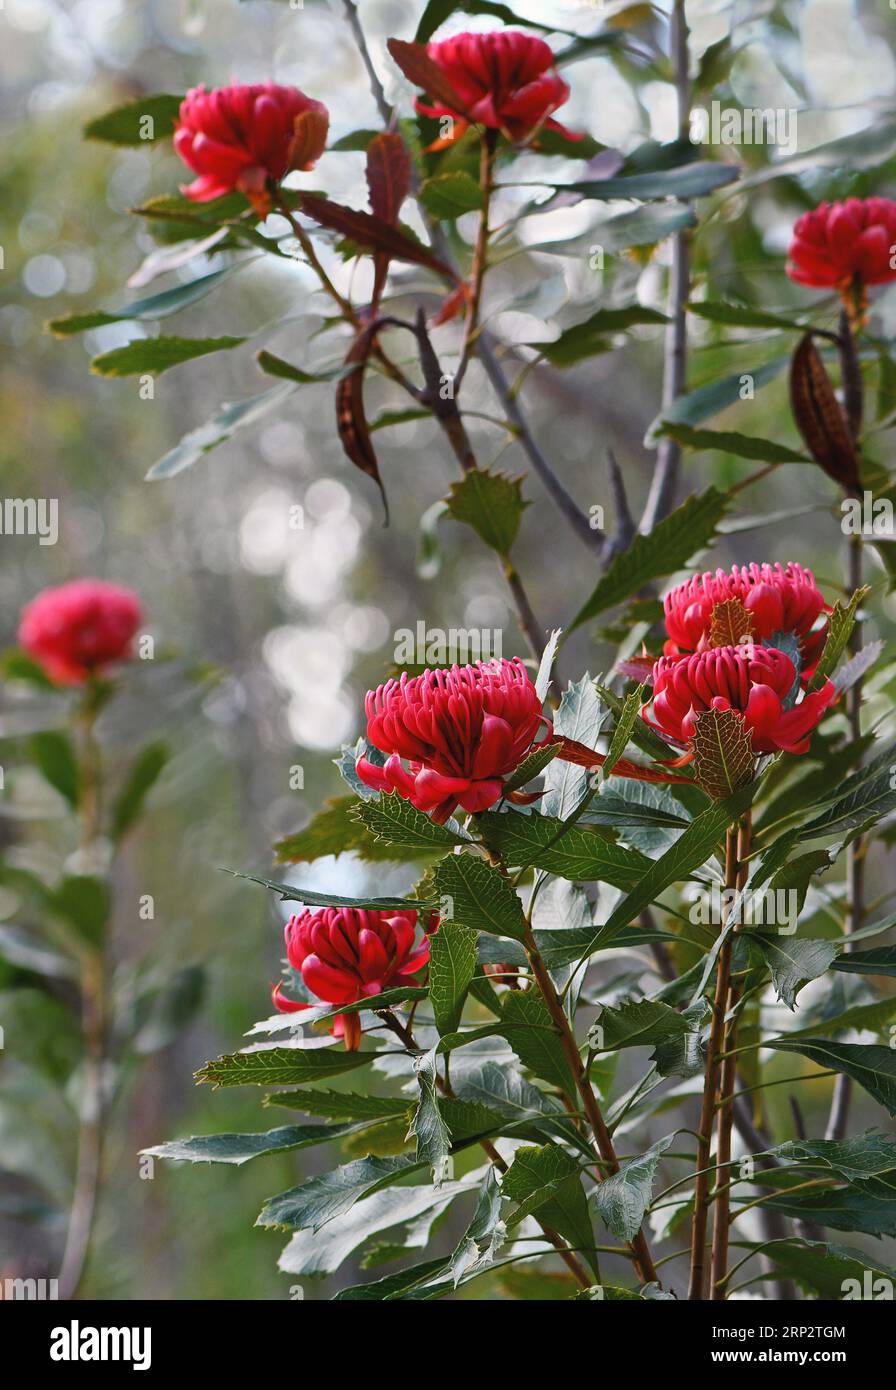 Iconic Australian native red waratah flowers, Telopea speciosissima, family Proteaceae, growing in Sydney forest understorey amidst Scribbly Gum Trees Stock Photo